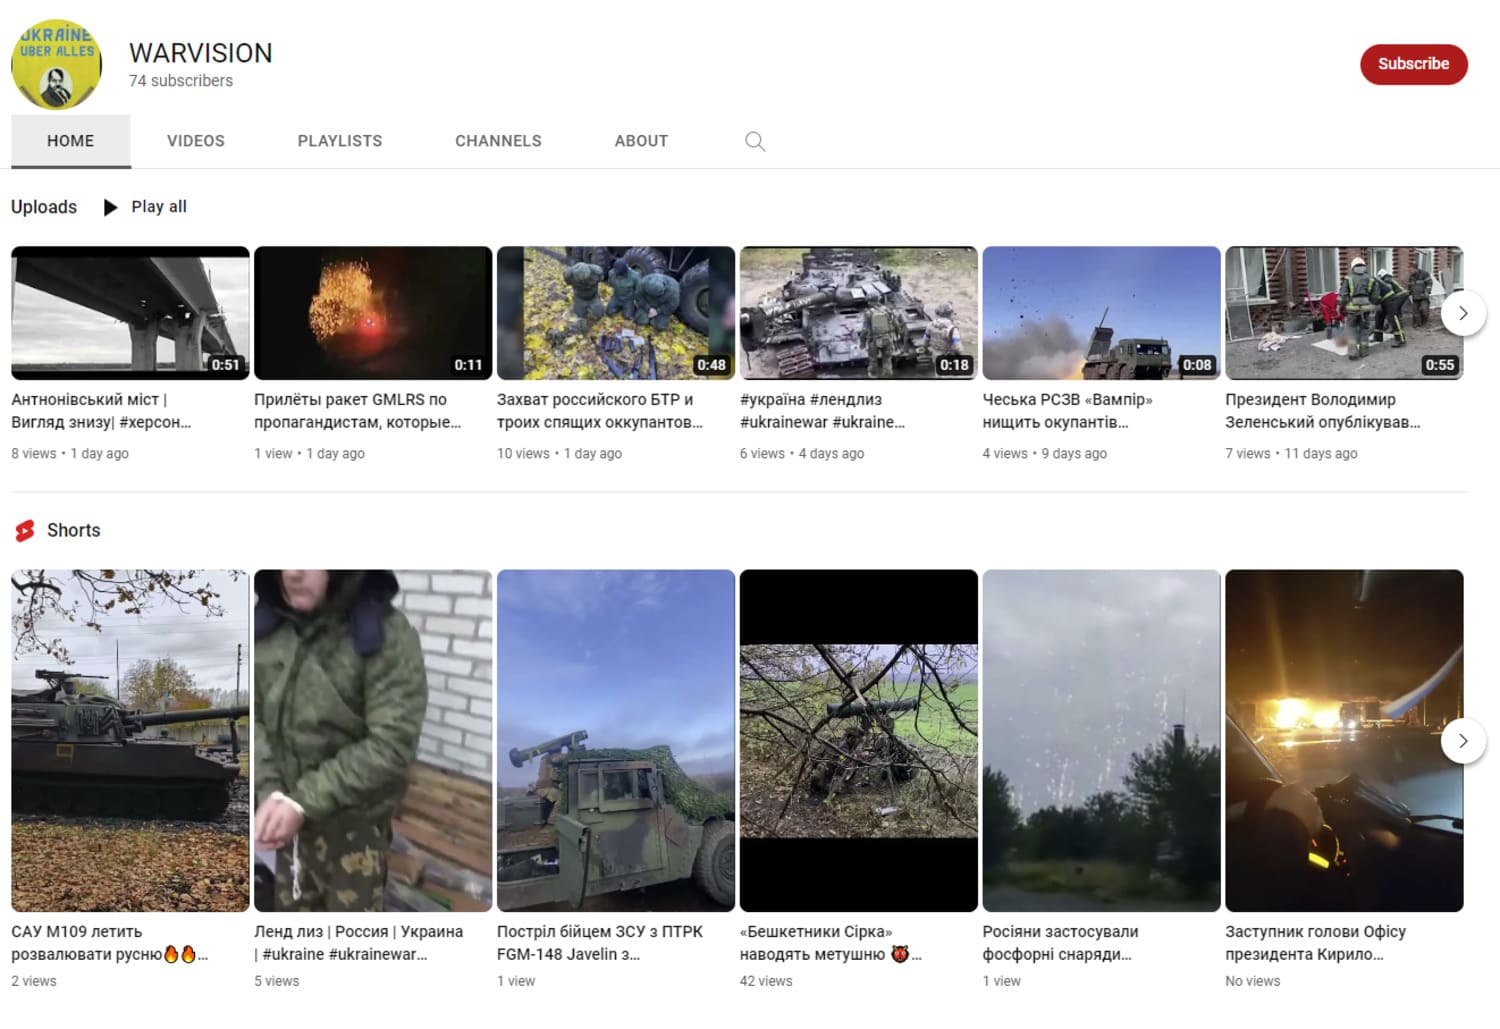 Youtube video content showing events taking place in Ukraine